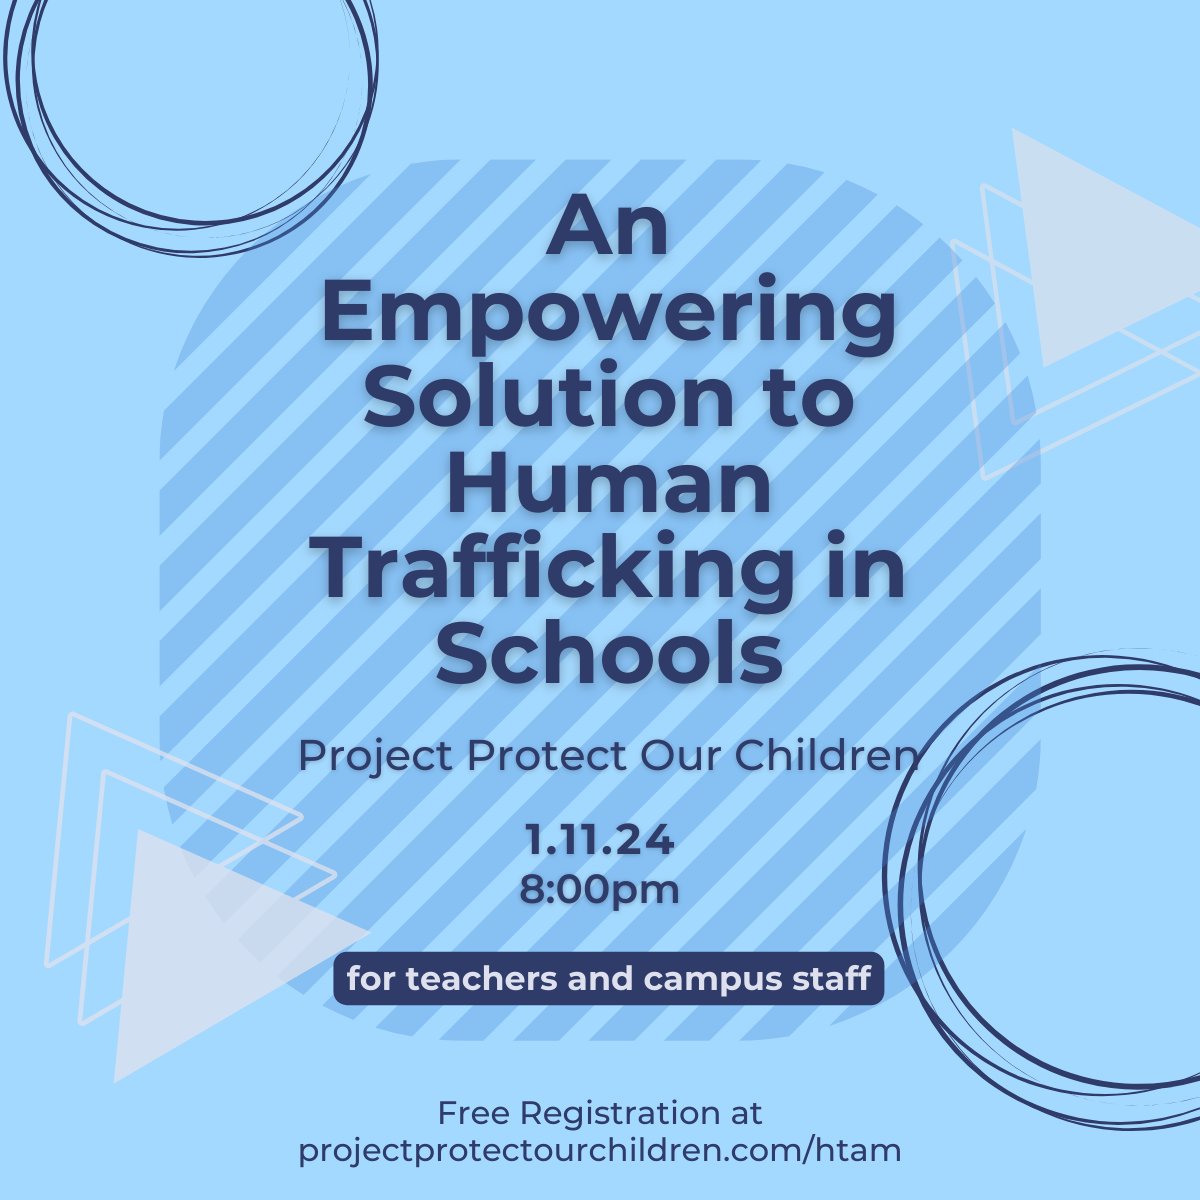 If you are in education, we want to talk to YOU! Which audience describes you best? Visit our website to register for the webinar for you! Hope to see you on either January 11th or January 17th!
#texaseducation #schooldistricts #humantraffickingawarenessmonth #youthempowerment